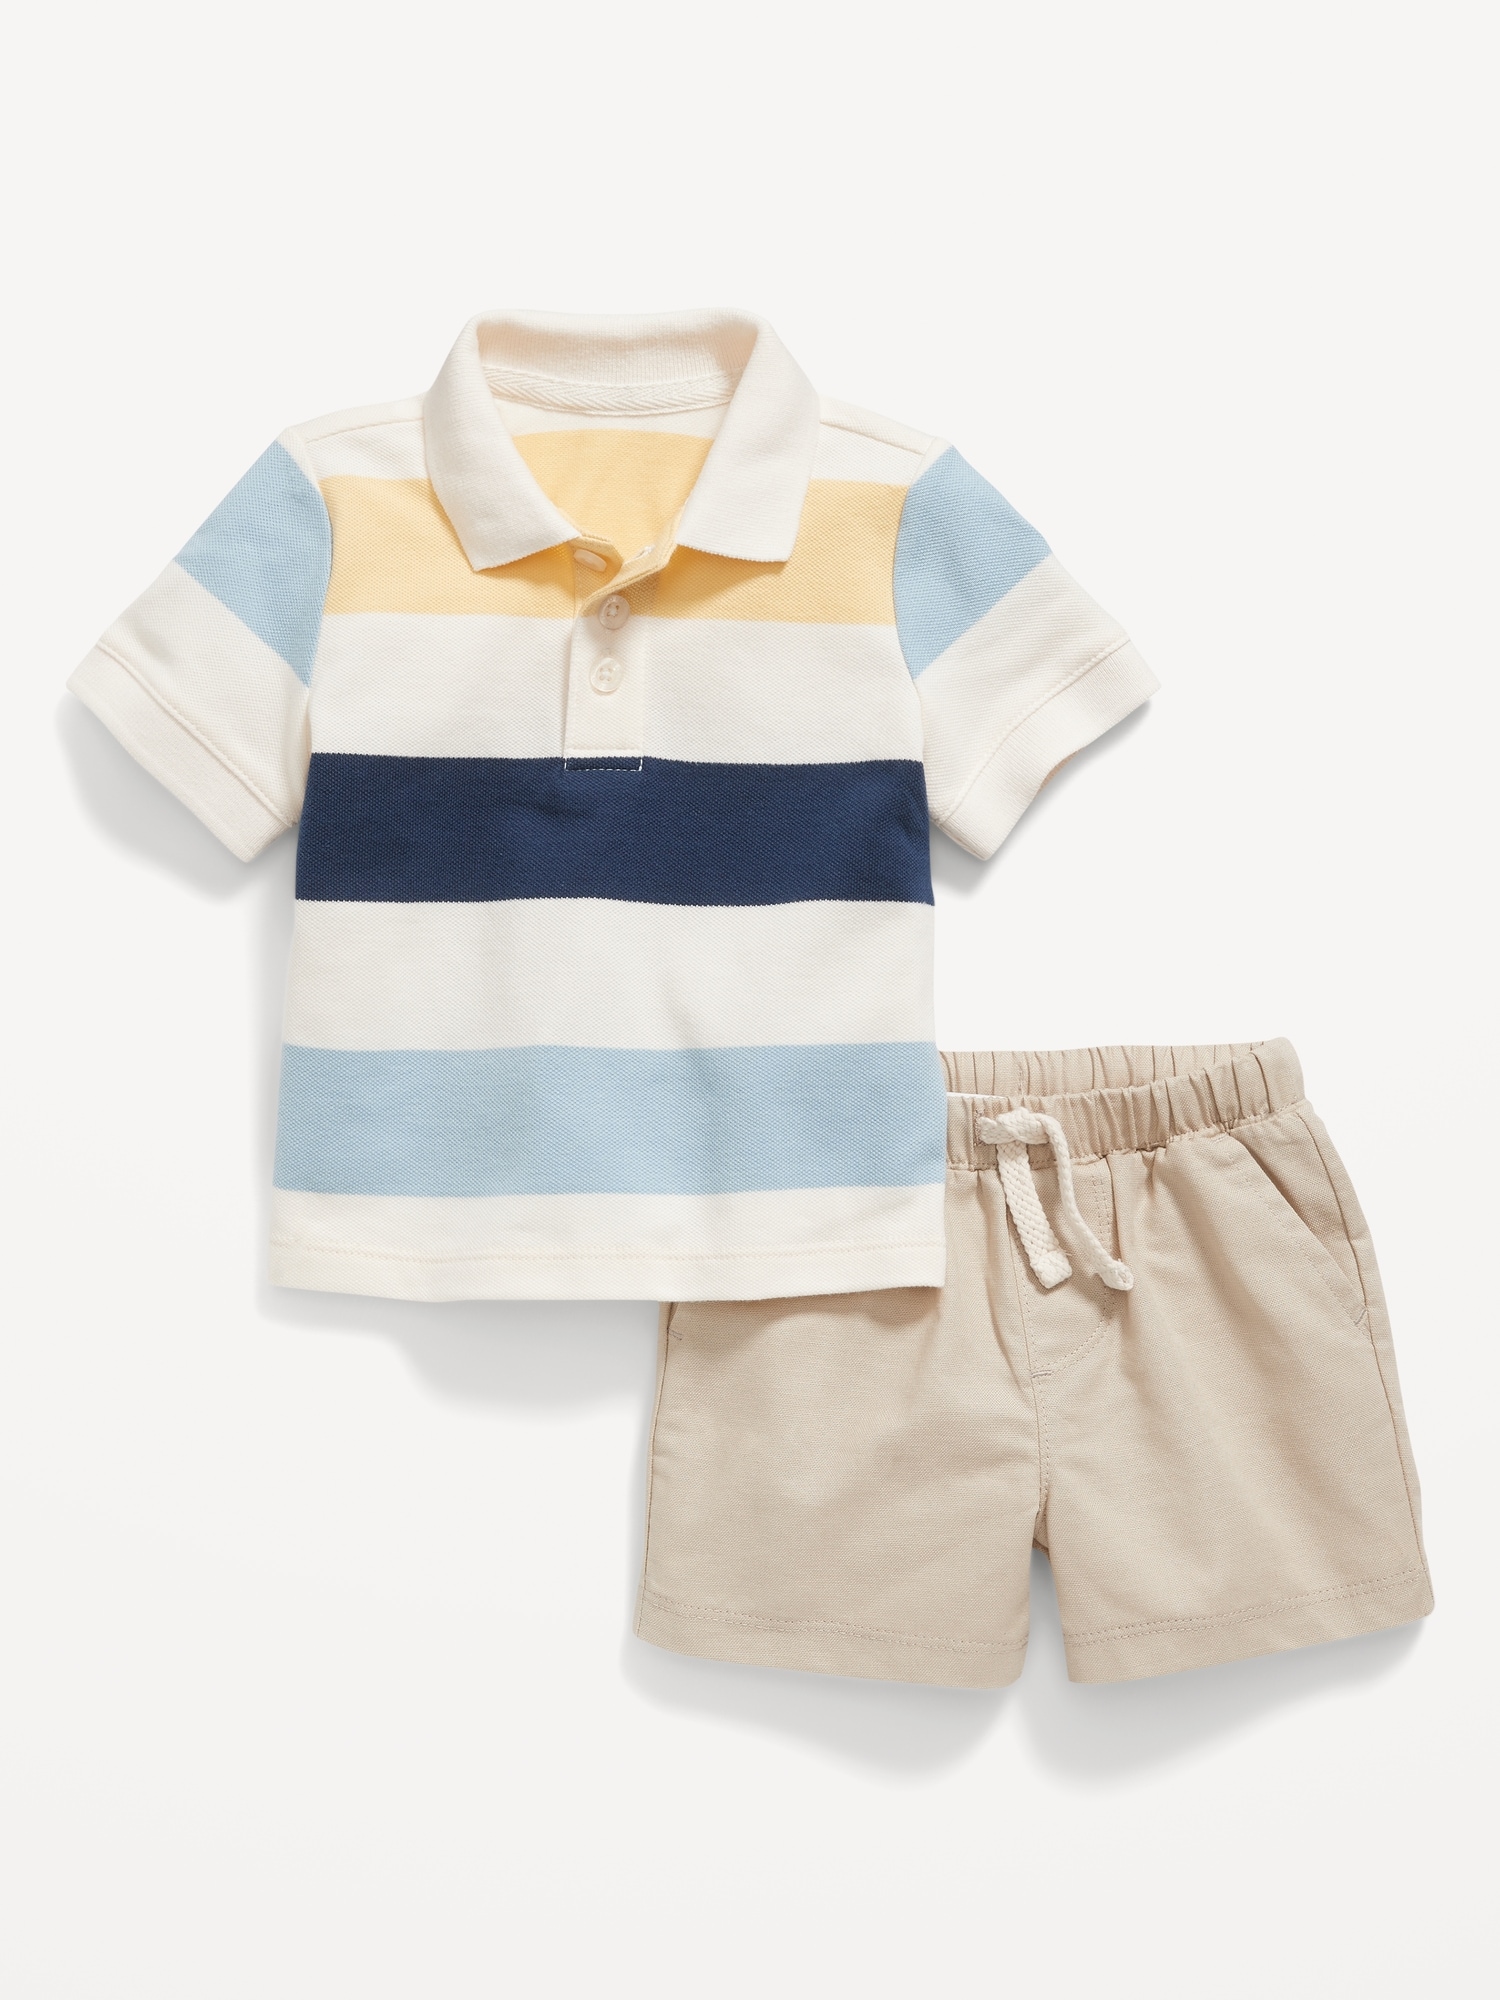 Boys Clothing | Baby Boy Dress For 1-2 Years | Freeup